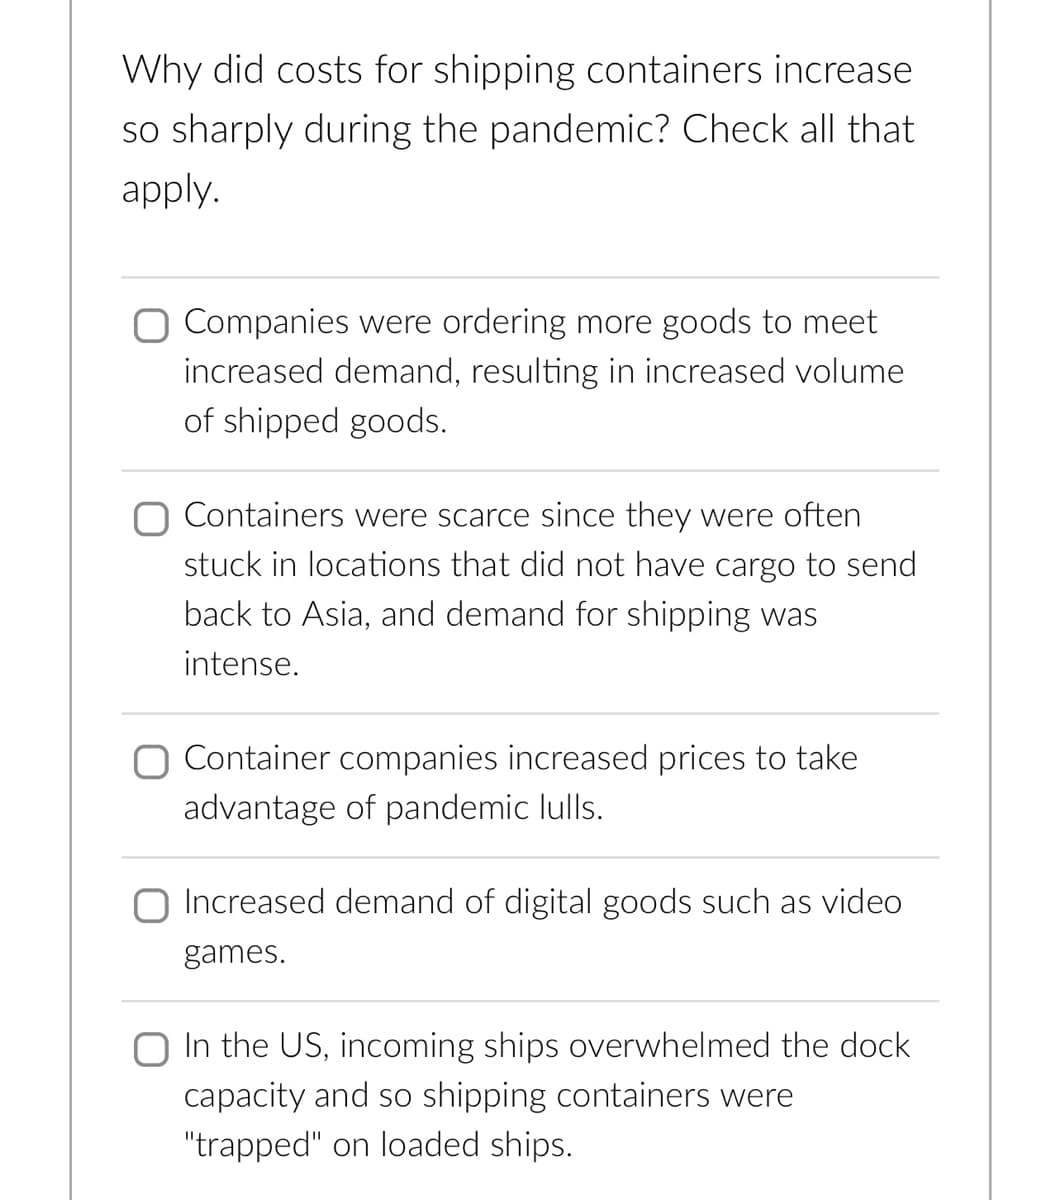 Why did costs for shipping containers increase
so sharply during the pandemic? Check all that
apply.
Companies were ordering more goods to meet
increased demand, resulting in increased volume
of shipped goods.
O Containers were scarce since they were often
stuck in locations that did not have cargo to send
back to Asia, and demand for shipping was
intense.
O Container companies increased prices to take
advantage of pandemic lulls.
Increased demand of digital goods such as video
games.
In the US, incoming ships overwhelmed the dock
capacity and so shipping containers were
"trapped" on loaded ships.